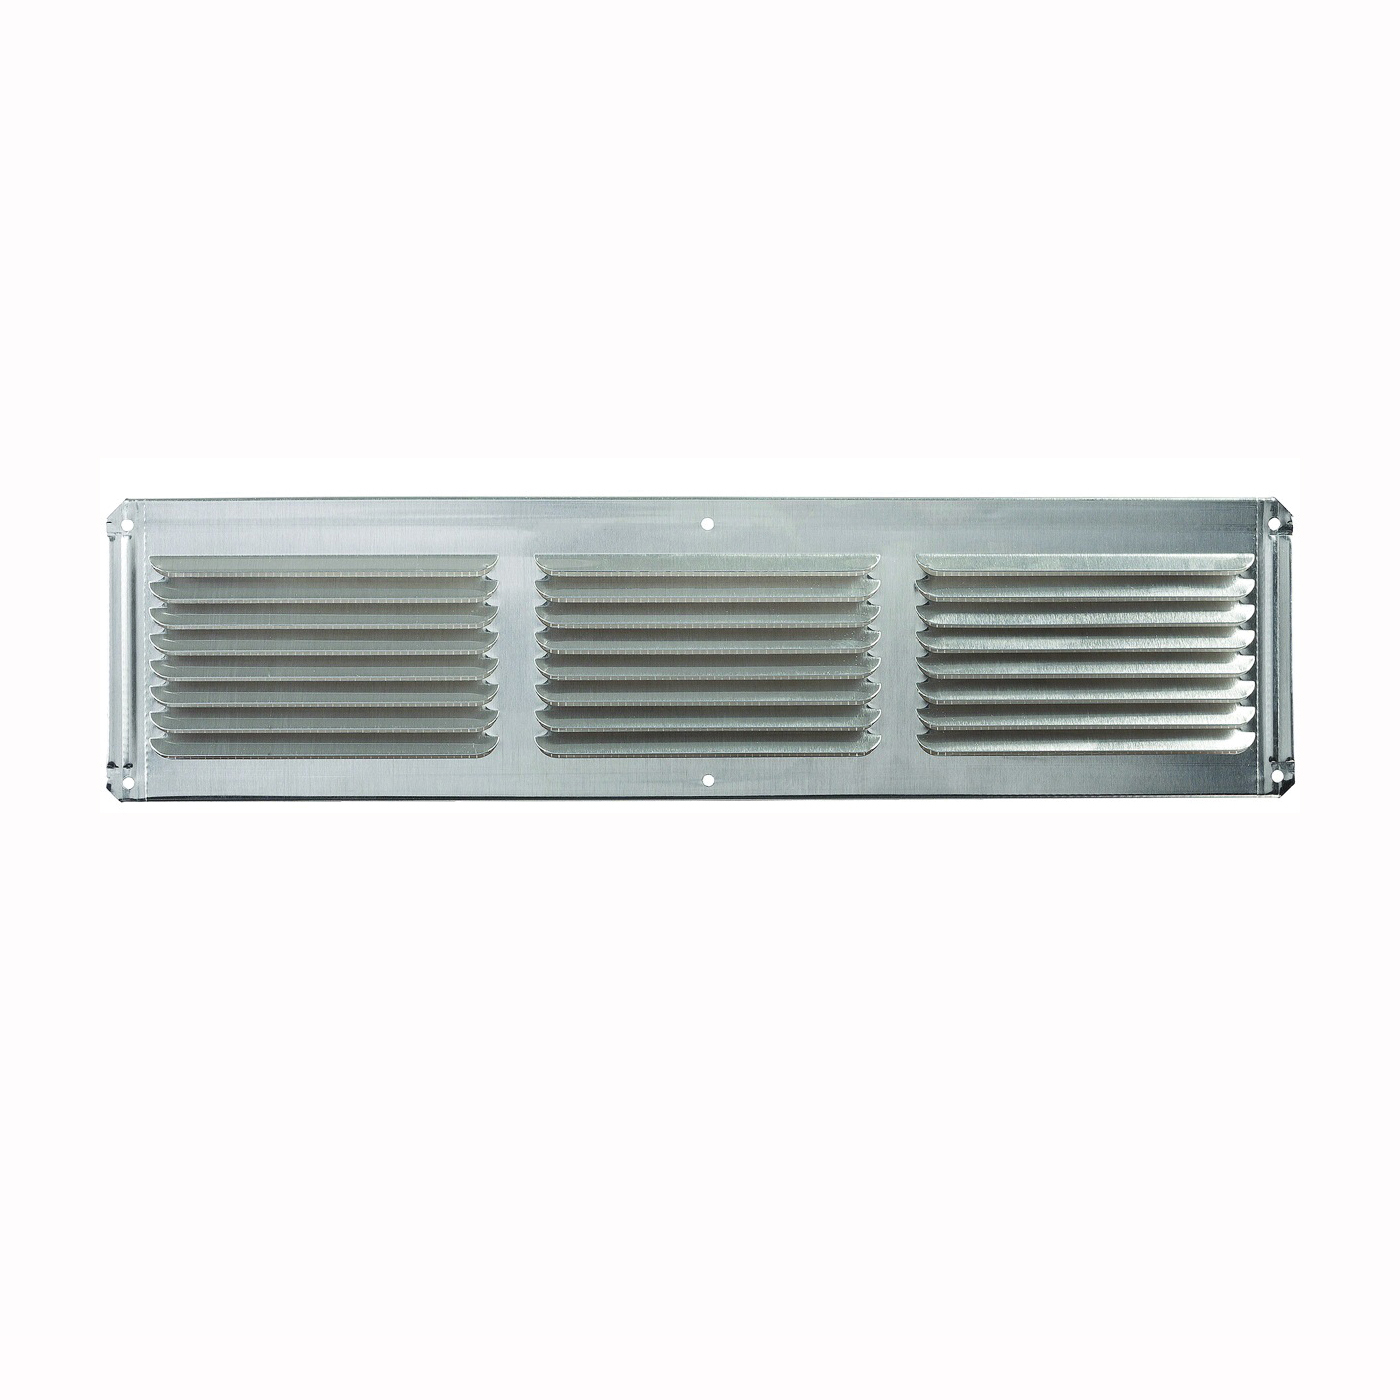 Master Flow EAC16X4 Undereave Vent, 4 in L, 16 in W, 26 sq-ft Net Free Ventilating Area, Aluminum, Mill - 1